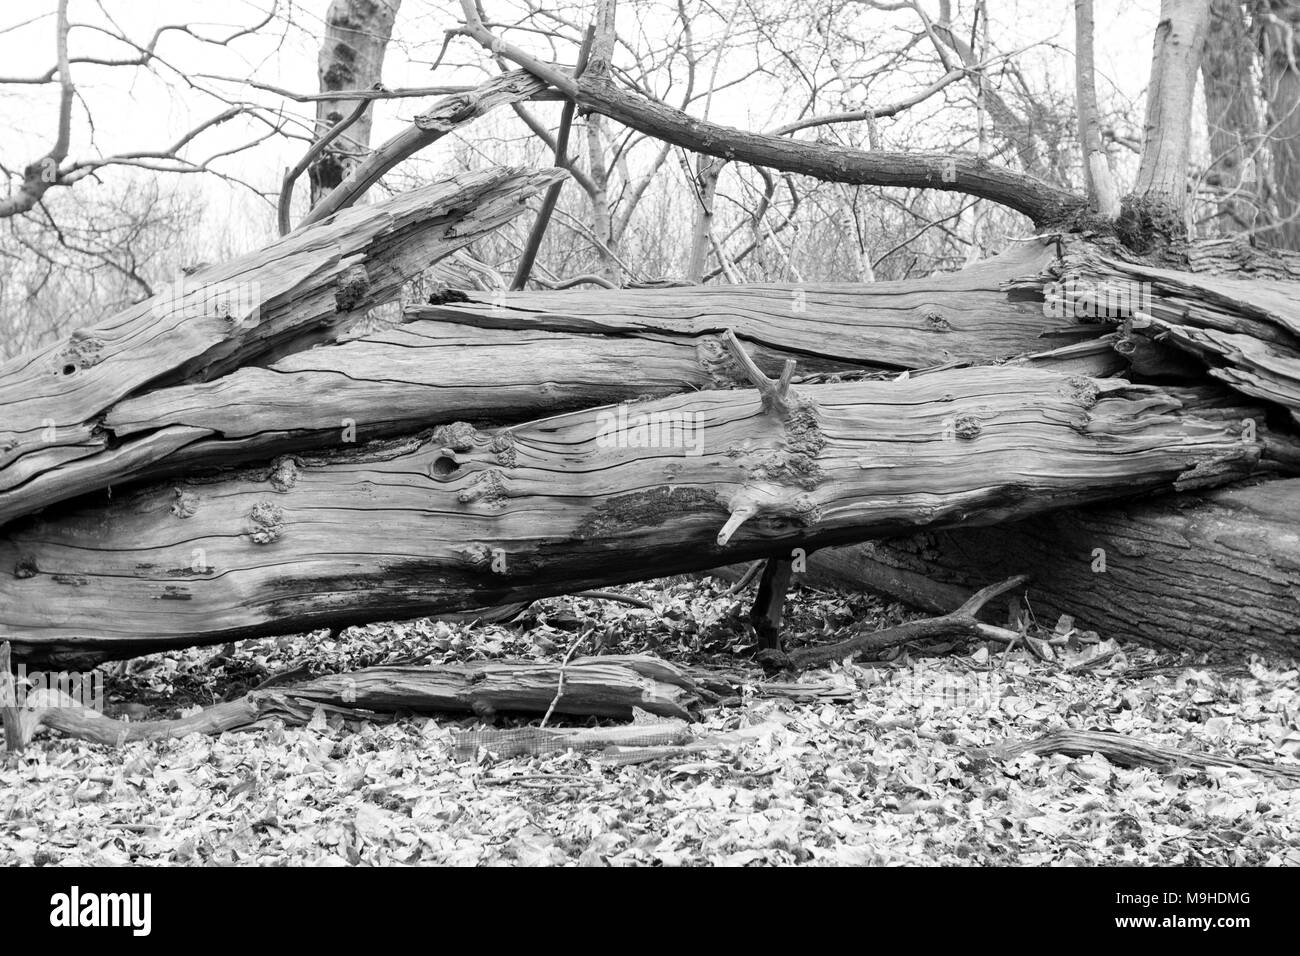 Fallen sweet chestnut tree has broken in two places as it hit the ground and was smashed over another fallen tree with leaves around - black and white Stock Photo